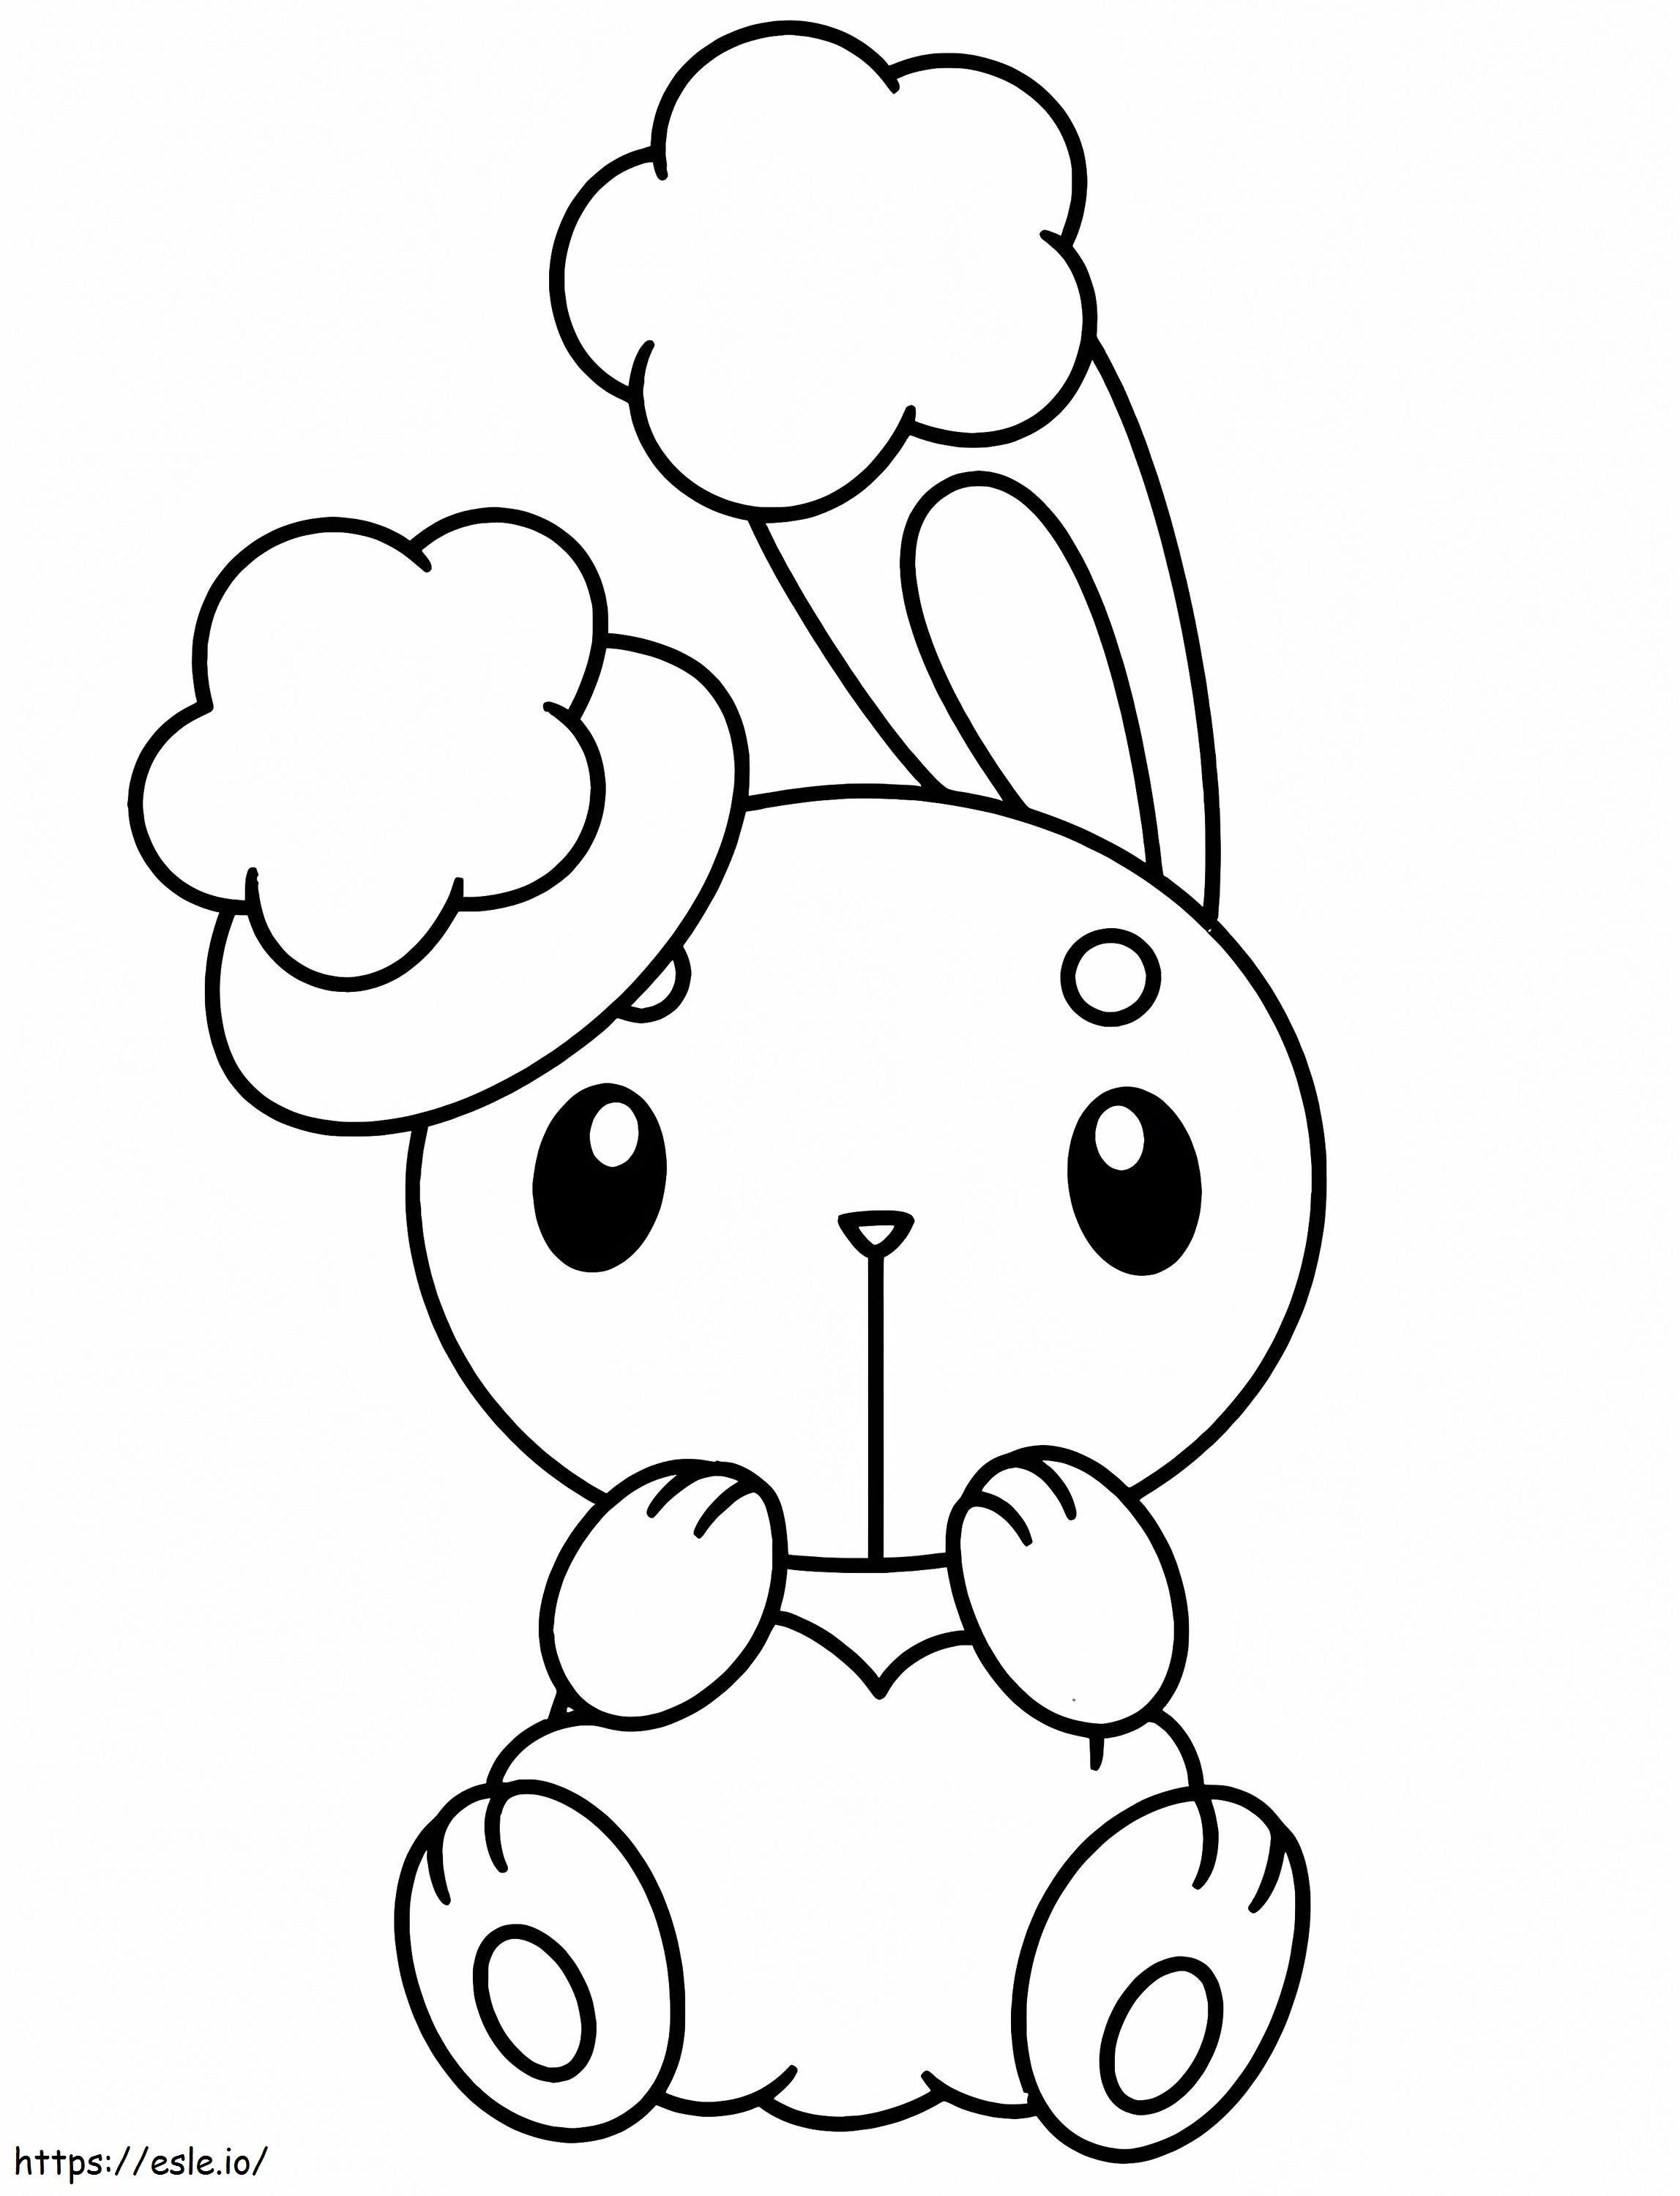 Lovely Buneary Pokemon coloring page